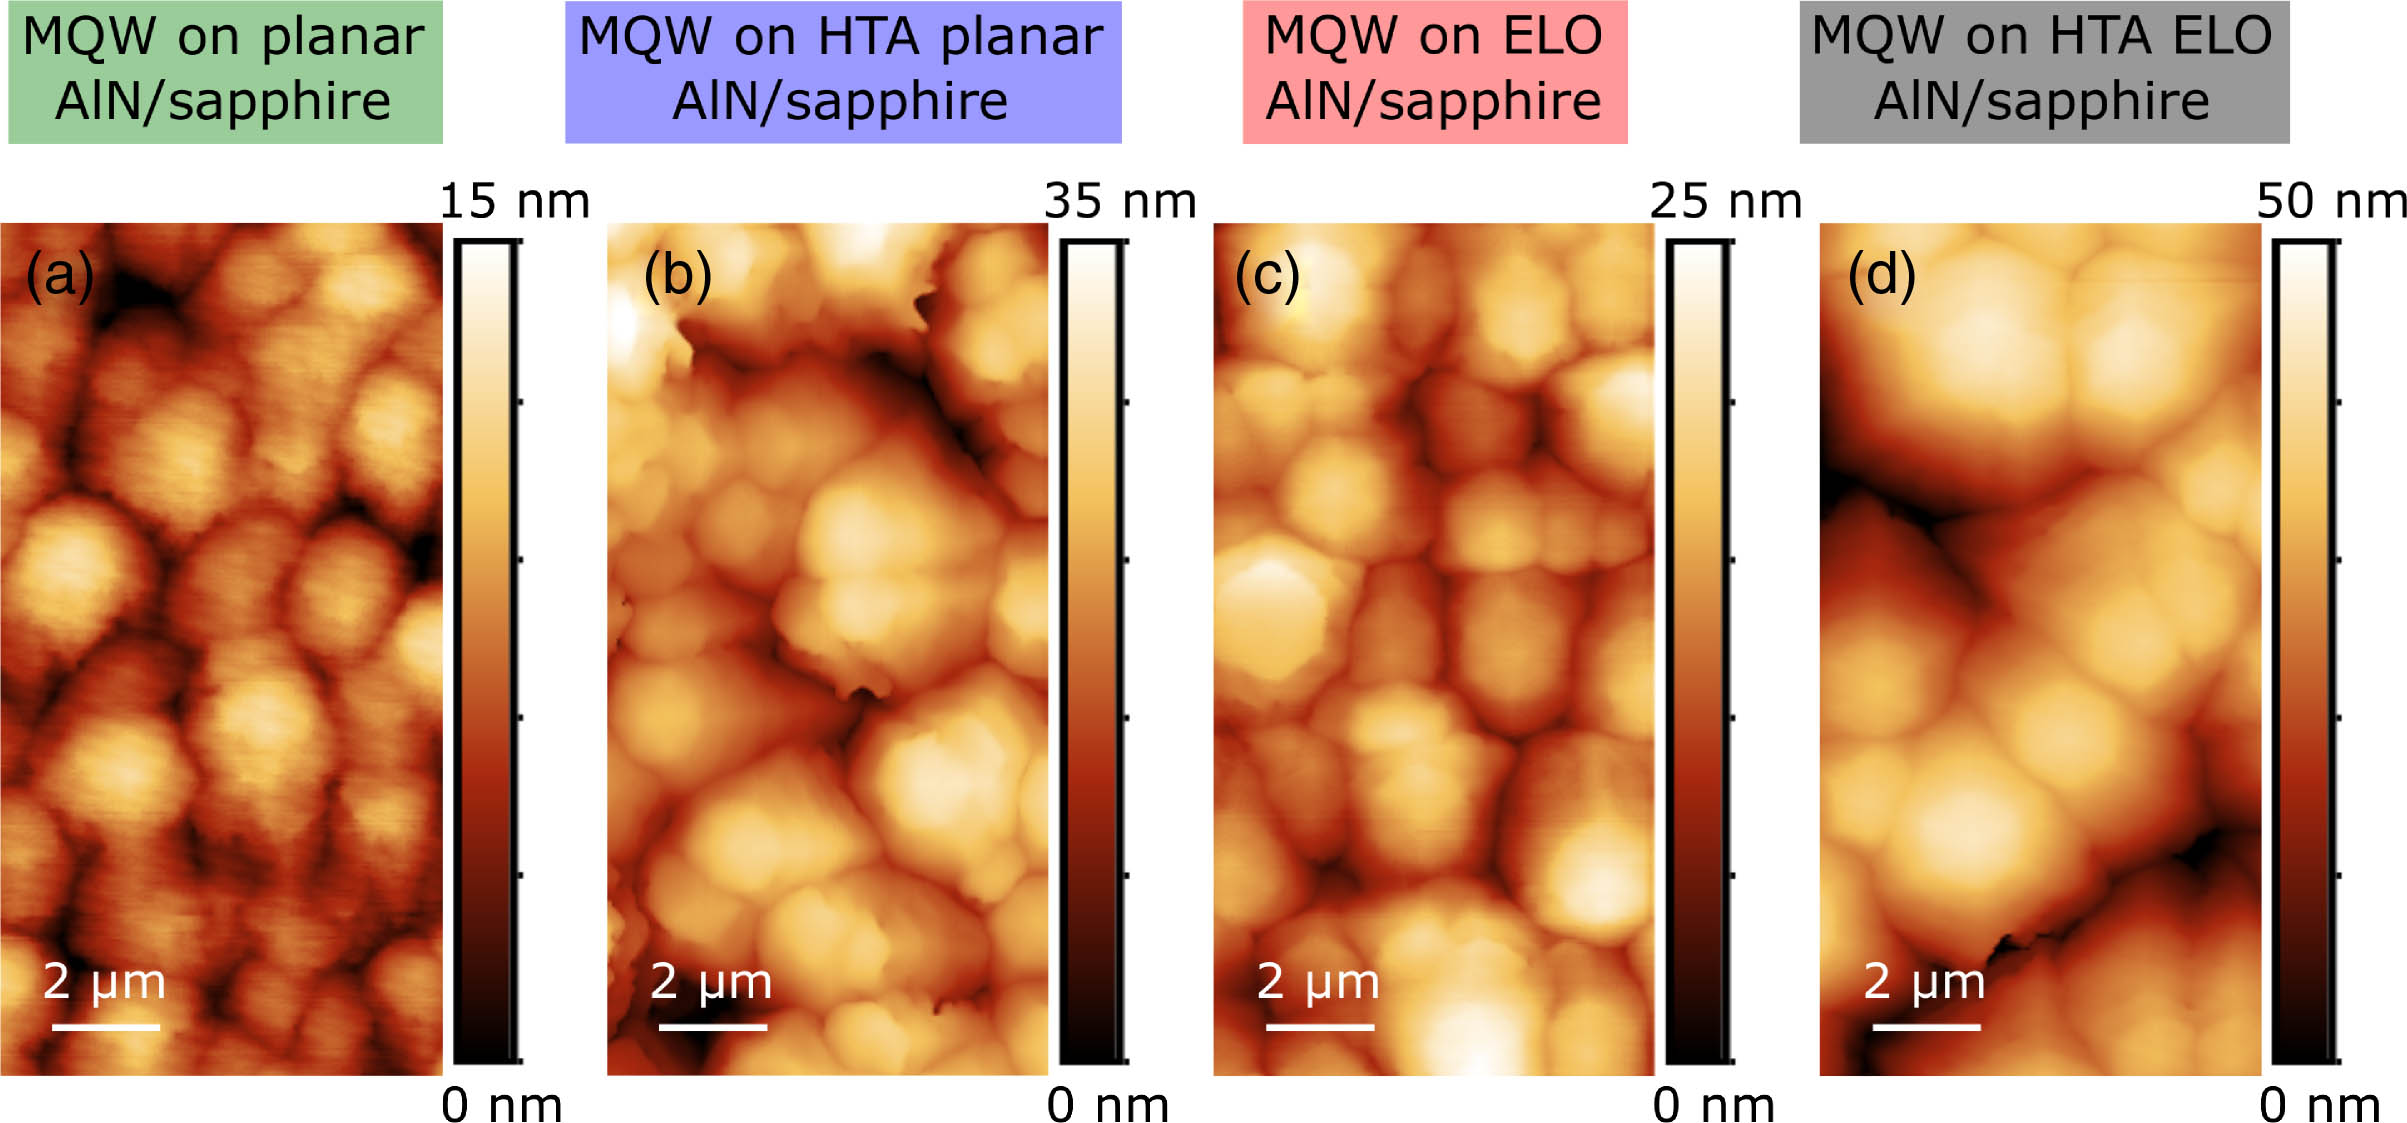 AFM images of the MQW samples on (a) planar, (b) HTA planar, (c) ELO, and (d) HTA ELO templates.